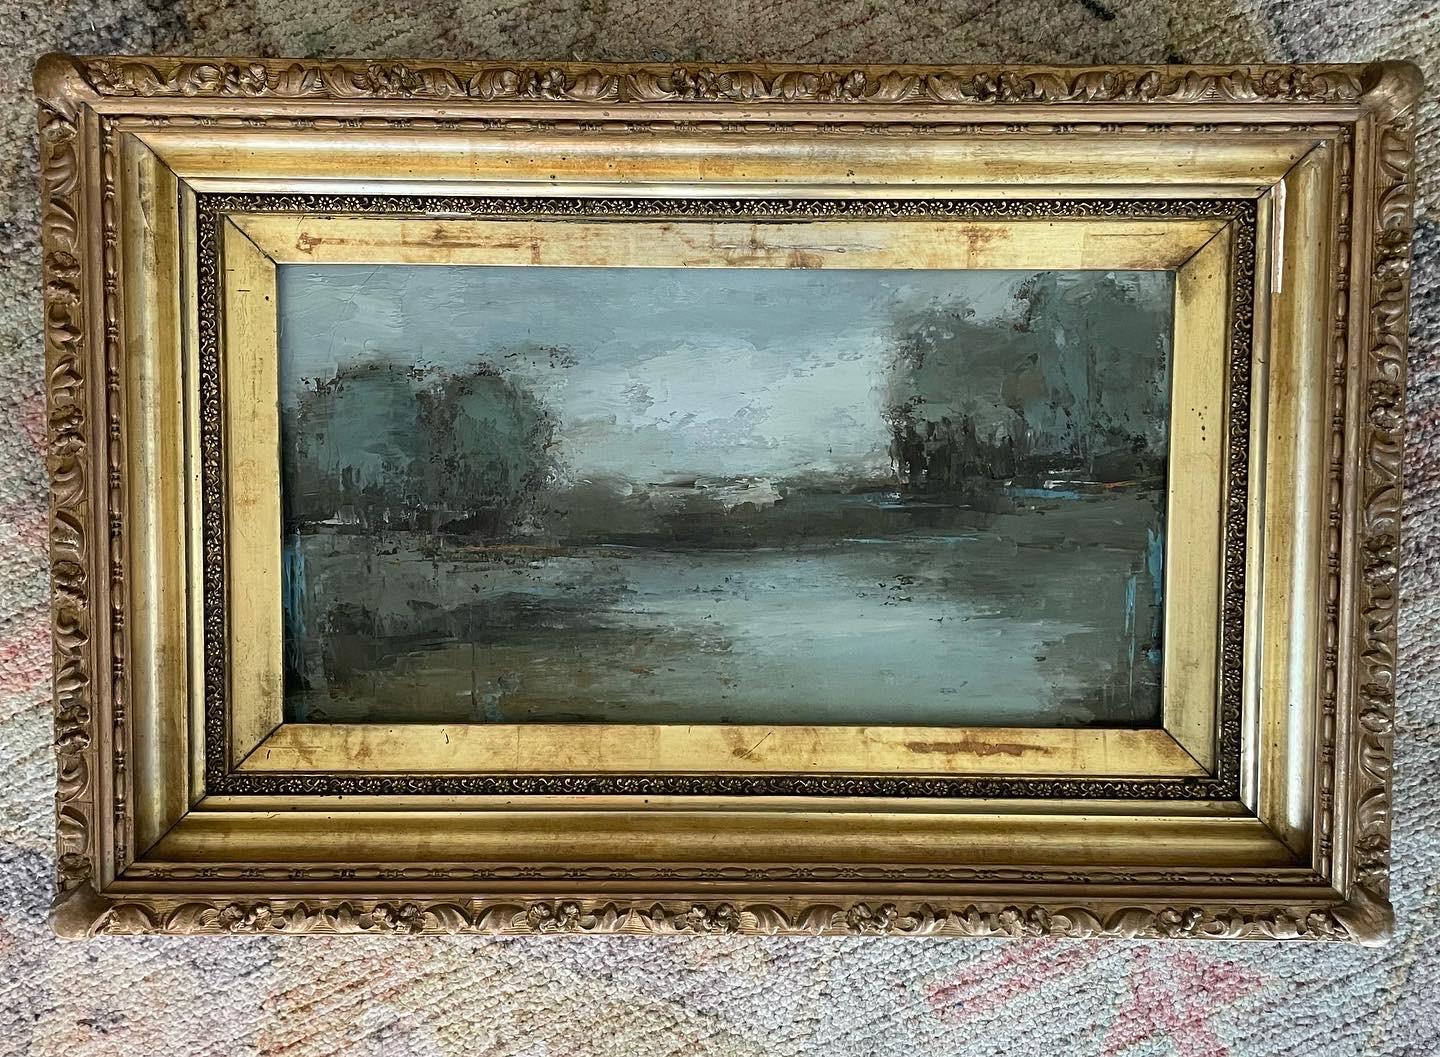 This piece is framed in a one-of-a-kind antique frame.

Unframed this painting measures 7.5 x 14.

In Geri's own words: "My love for art began in my early teens when I signed up for art class in high school and soon discovered that I had a passion